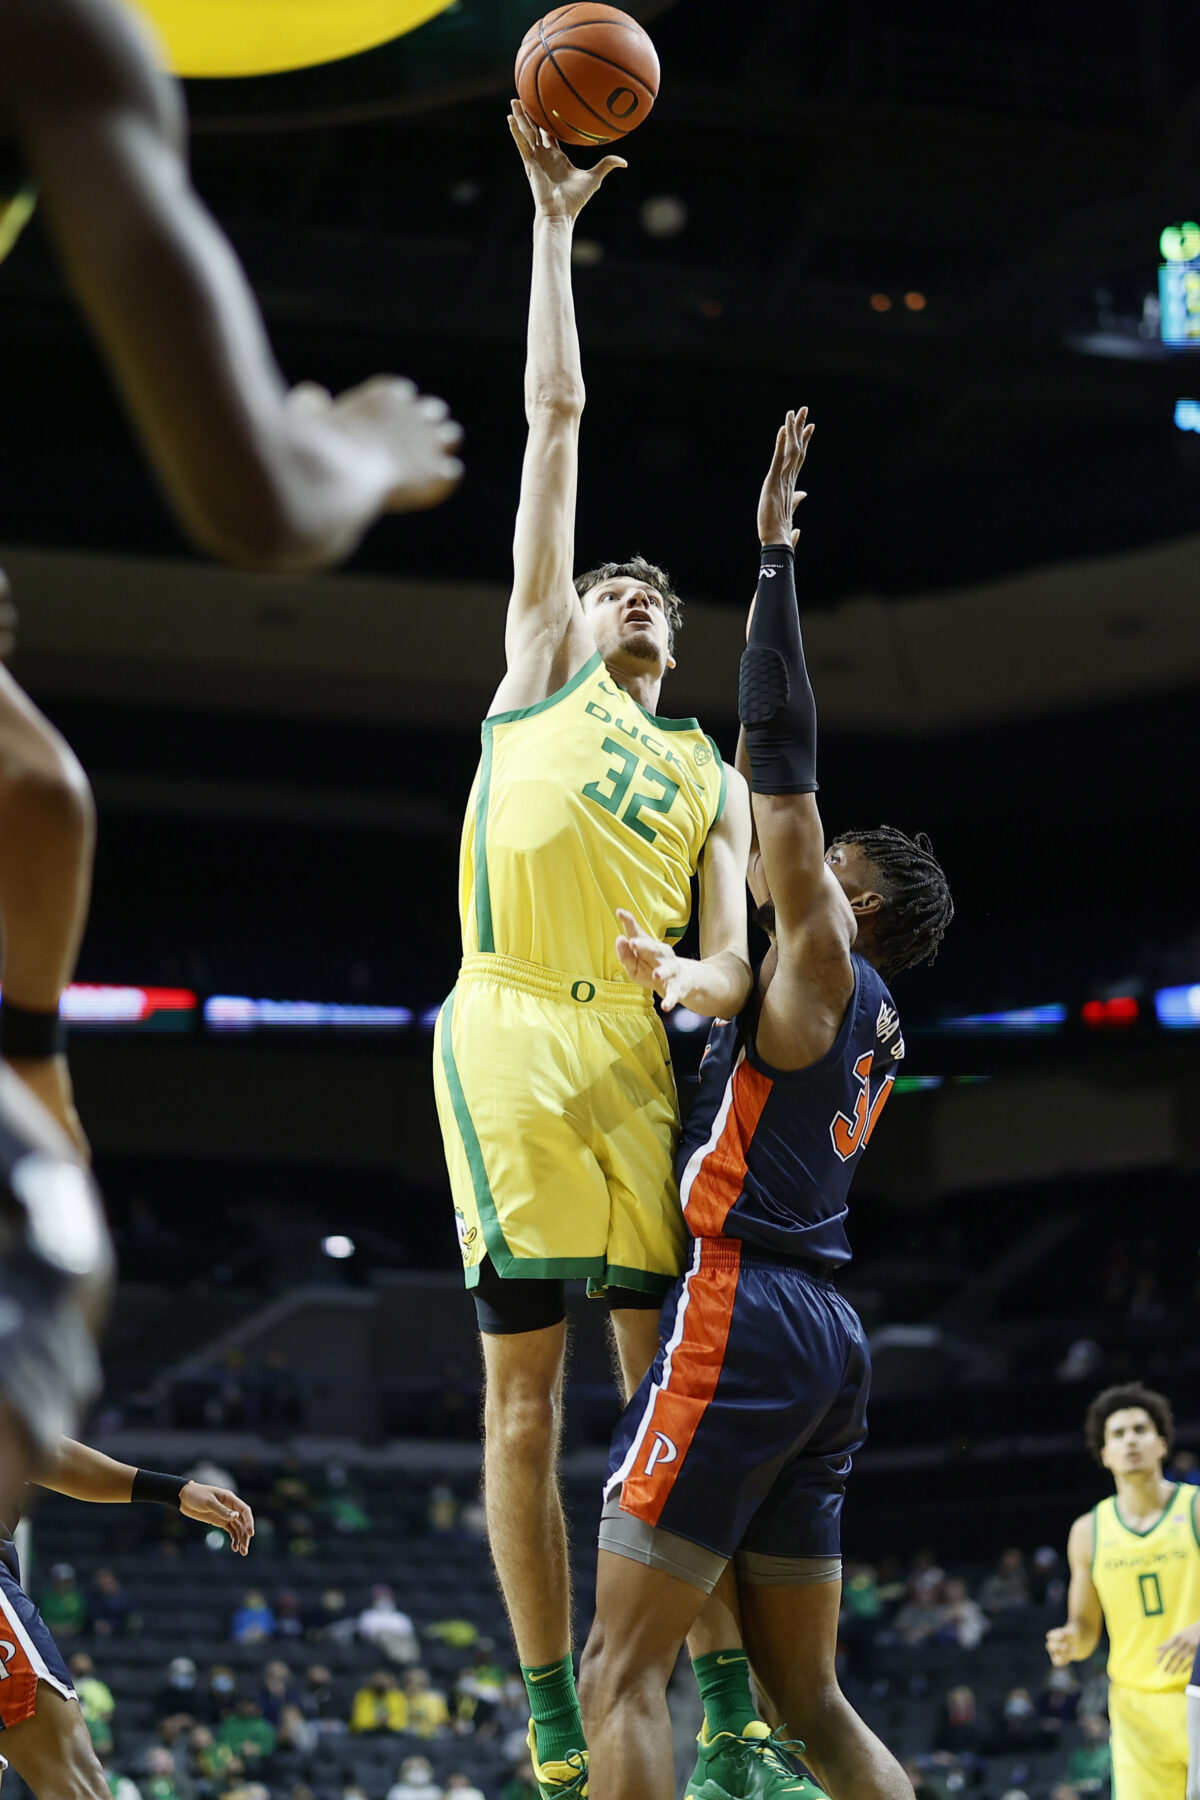 Dana Altman unsure about Nate Bittle’s avalibility for the rest of the season.